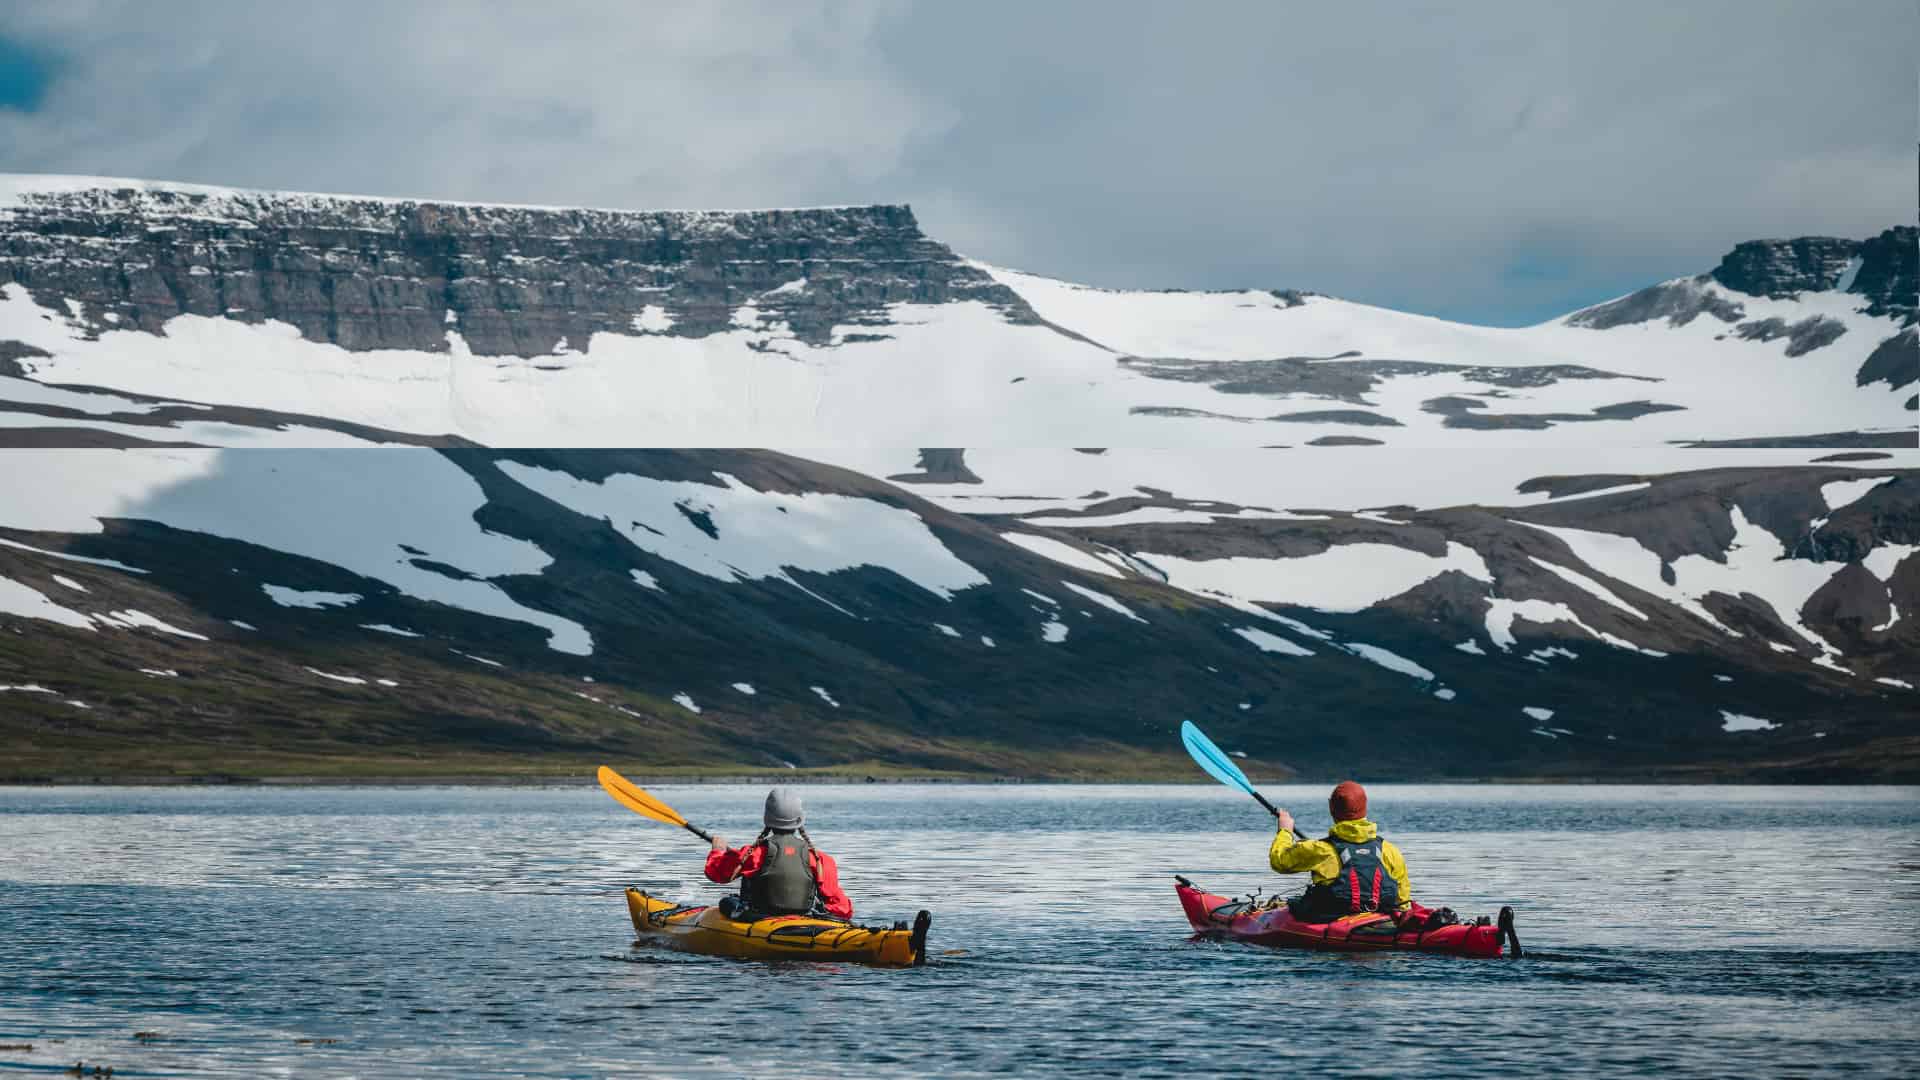 Two kayaks heading towards a snow covered mountain.